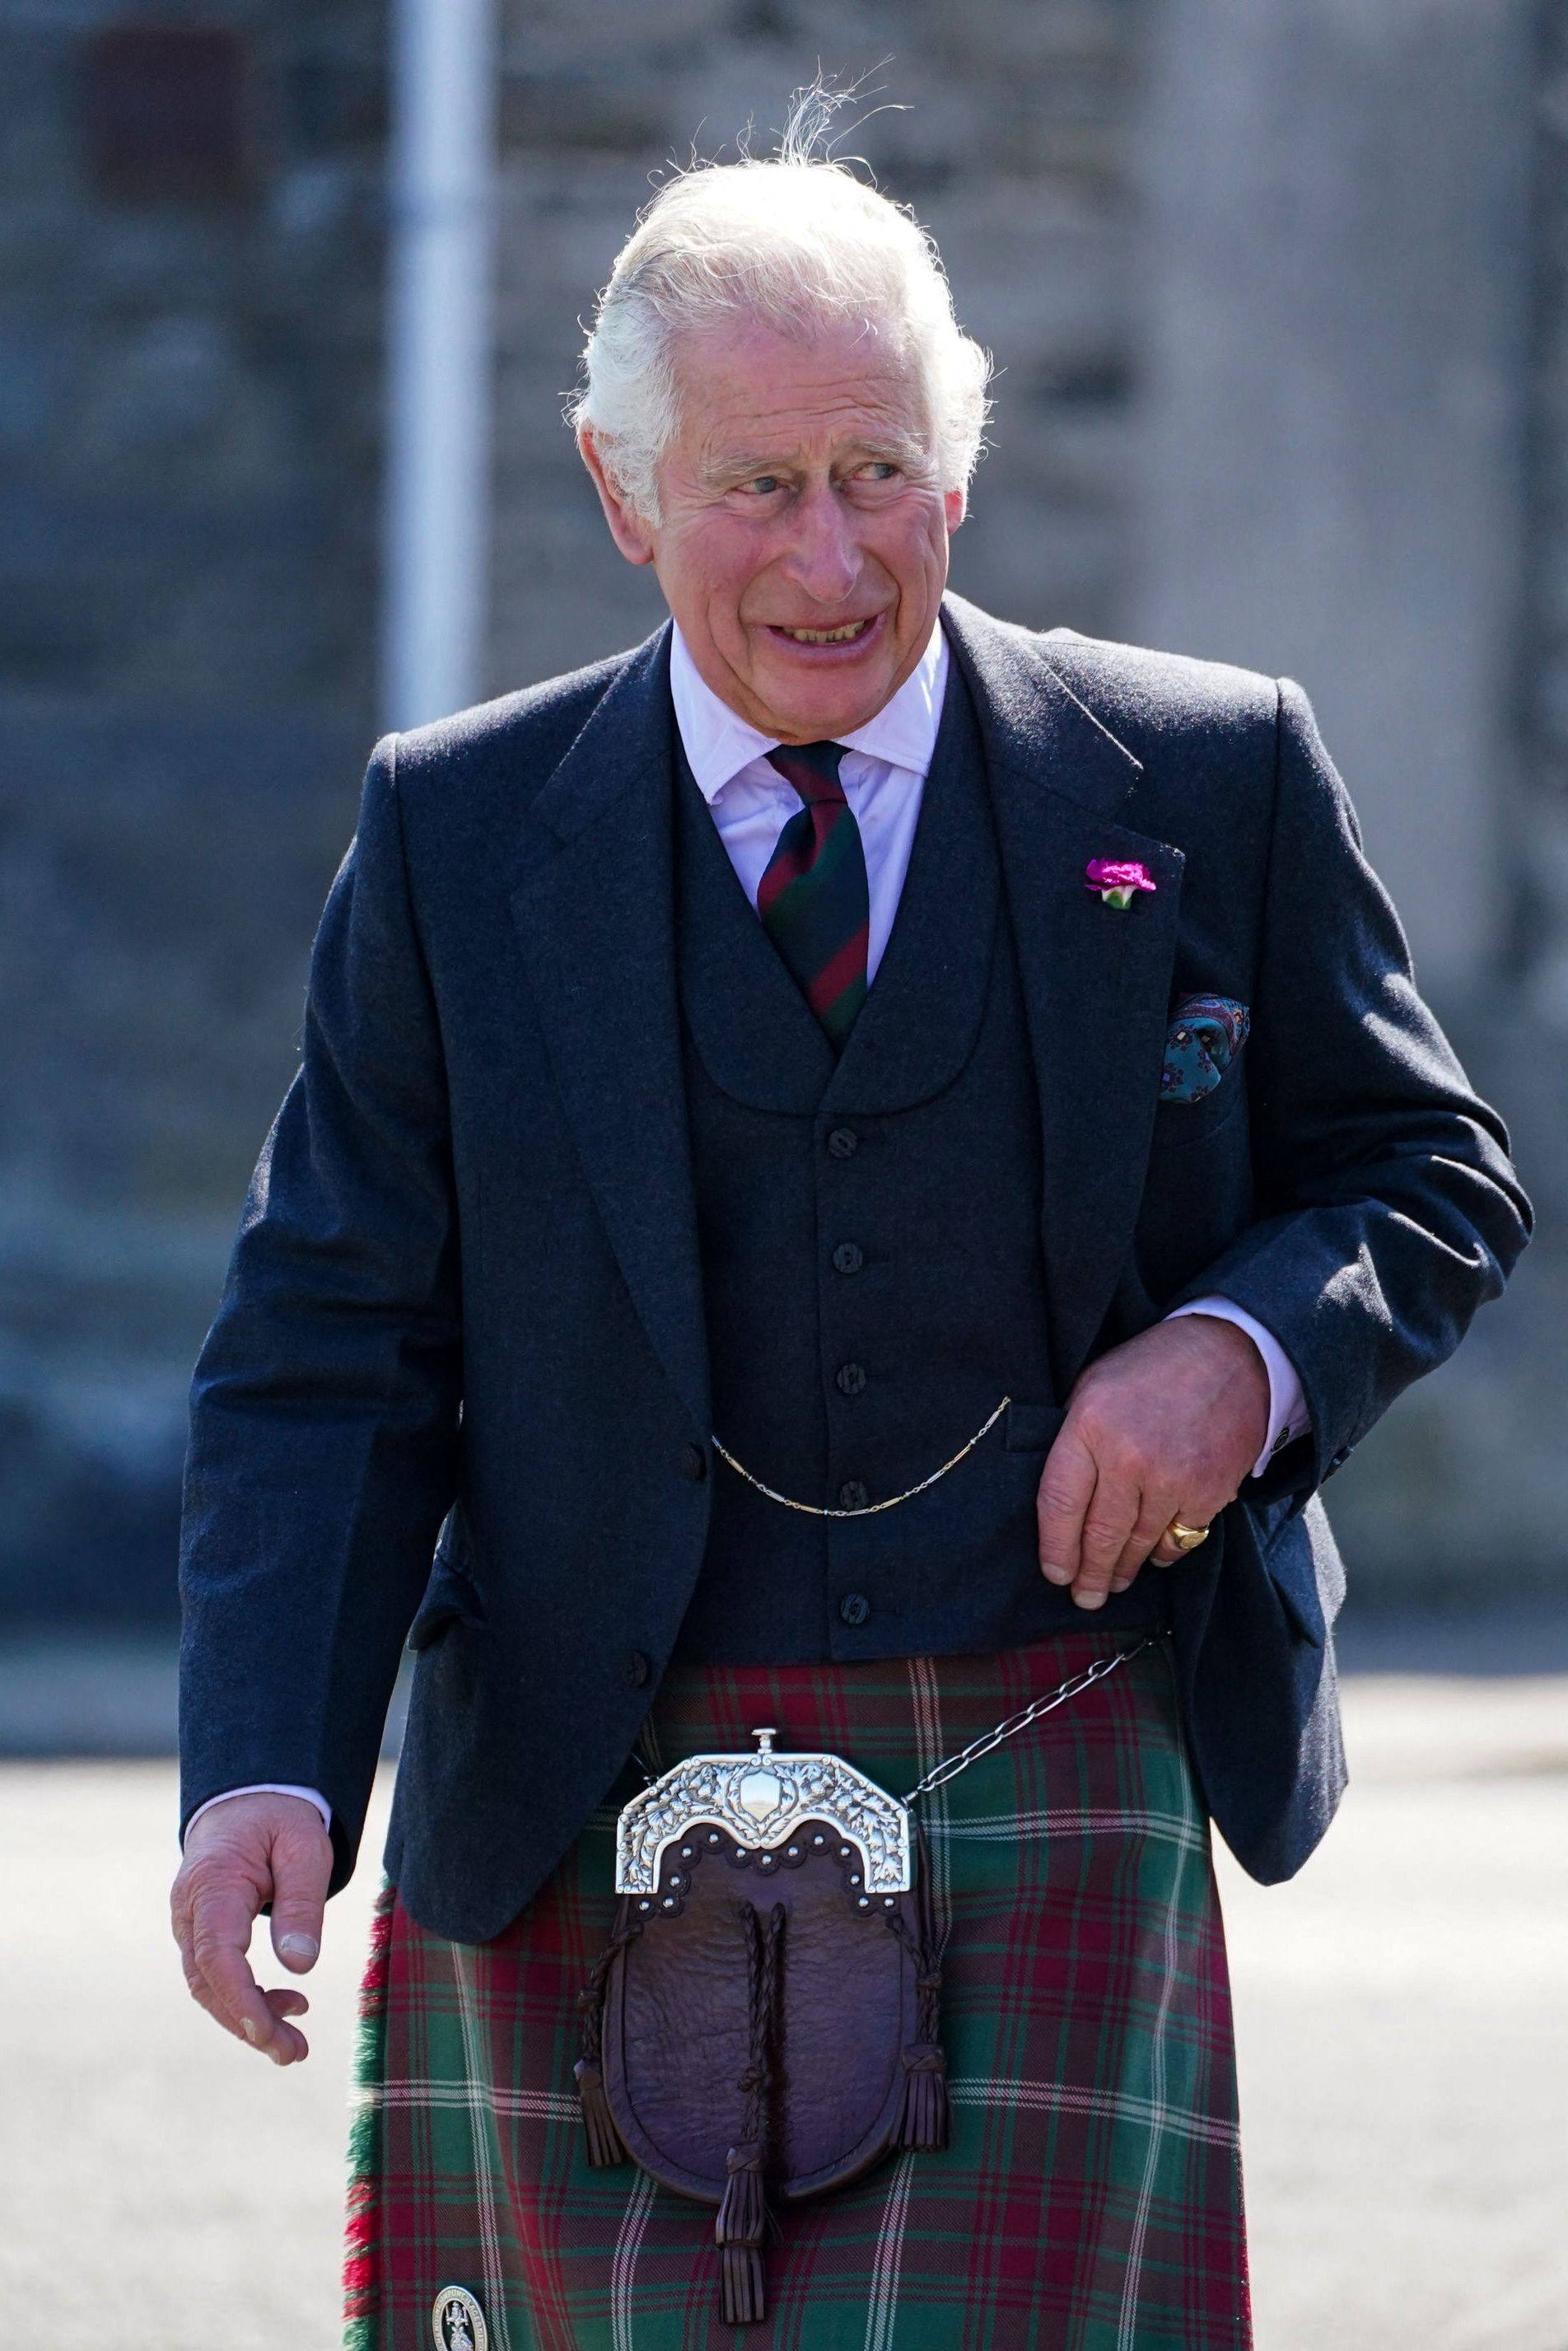 Charities lead by Britain’s Prince Charles, have been accused of criminal wrong doing. Photo: AFP